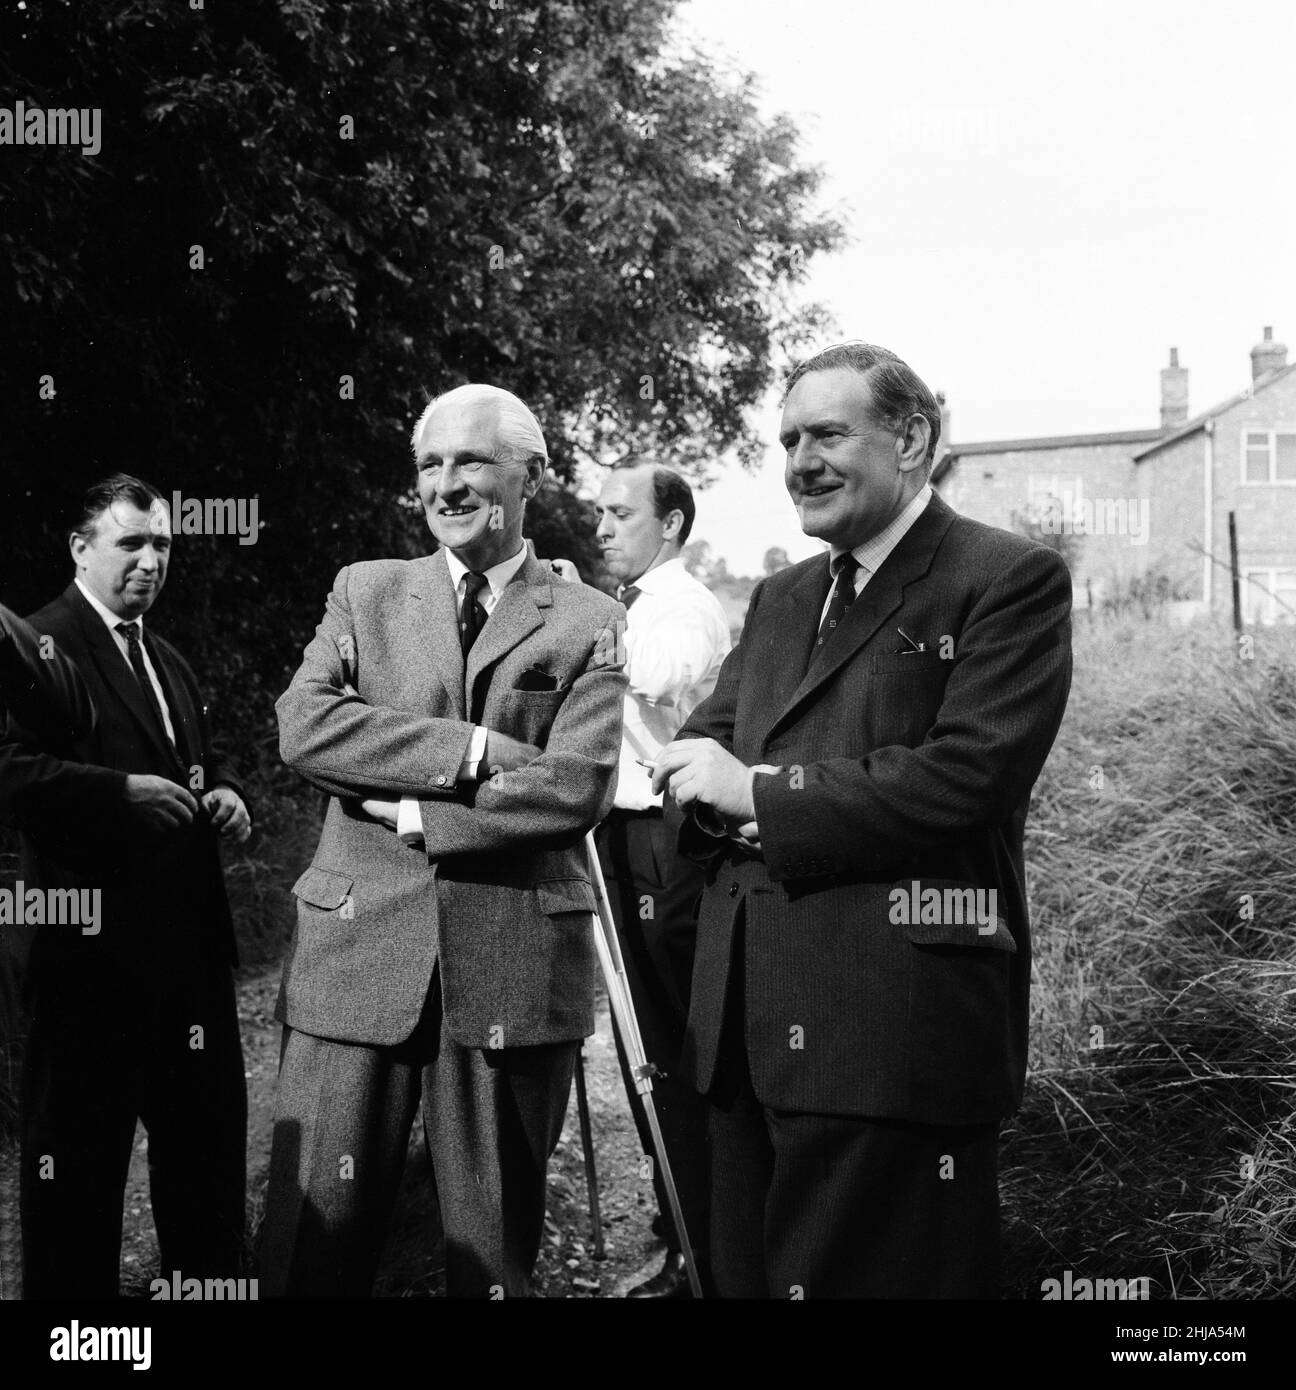 Leatherslade Farm, between Oakley and Brill in Buckinghamshire, hideout used by gang, 27 miles from the crime scene, Tuesday 13th August 1963. Our Picture Shows ... (left) Detective Superintendent Malcolm Fewtrell, Head of Buckinghamshire CID and (right) Detective Superintendent Gerald McArthur of Scotland Yard at farmhouse.   The 1963 Great Train Robbery was the robbery of 2.6 million pounds from a Royal Mail train heading from Glasgow to London on the West Coast Main Line in the early hours of 8th August 1963, at Bridego Railway Bridge, Ledburn, near Mentmore in  Buckinghamshire, England. Stock Photo